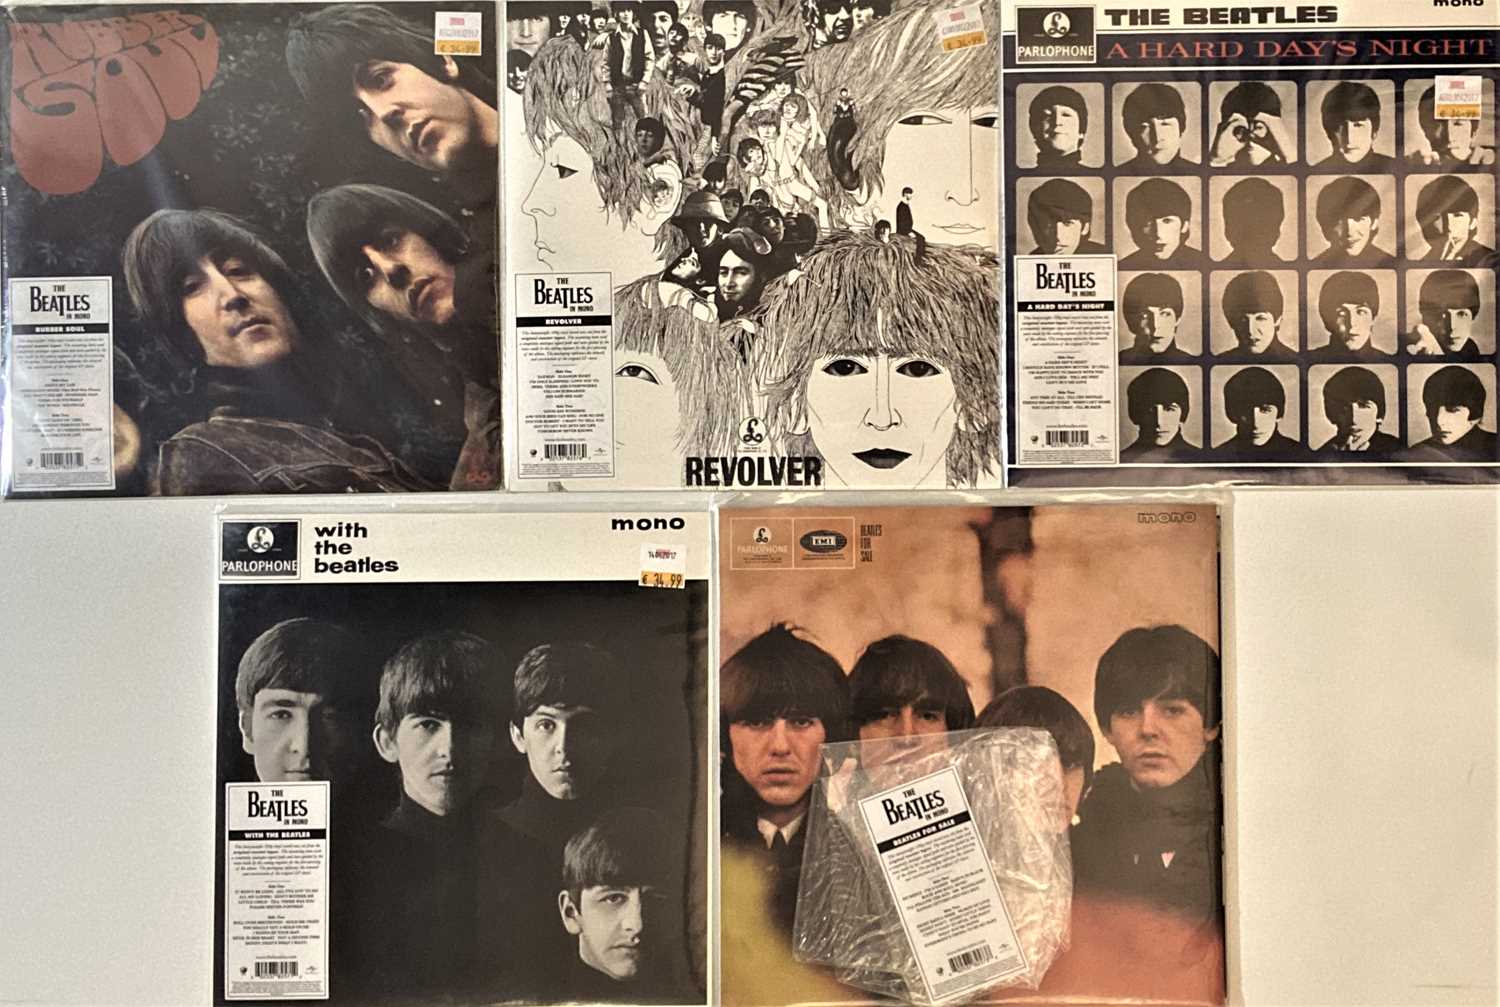 Lot 34 - THE BEATLES - STUDIO LPs (2014 LIMITED EDITION HEAVYWEIGHT 180G PRESSINGS)